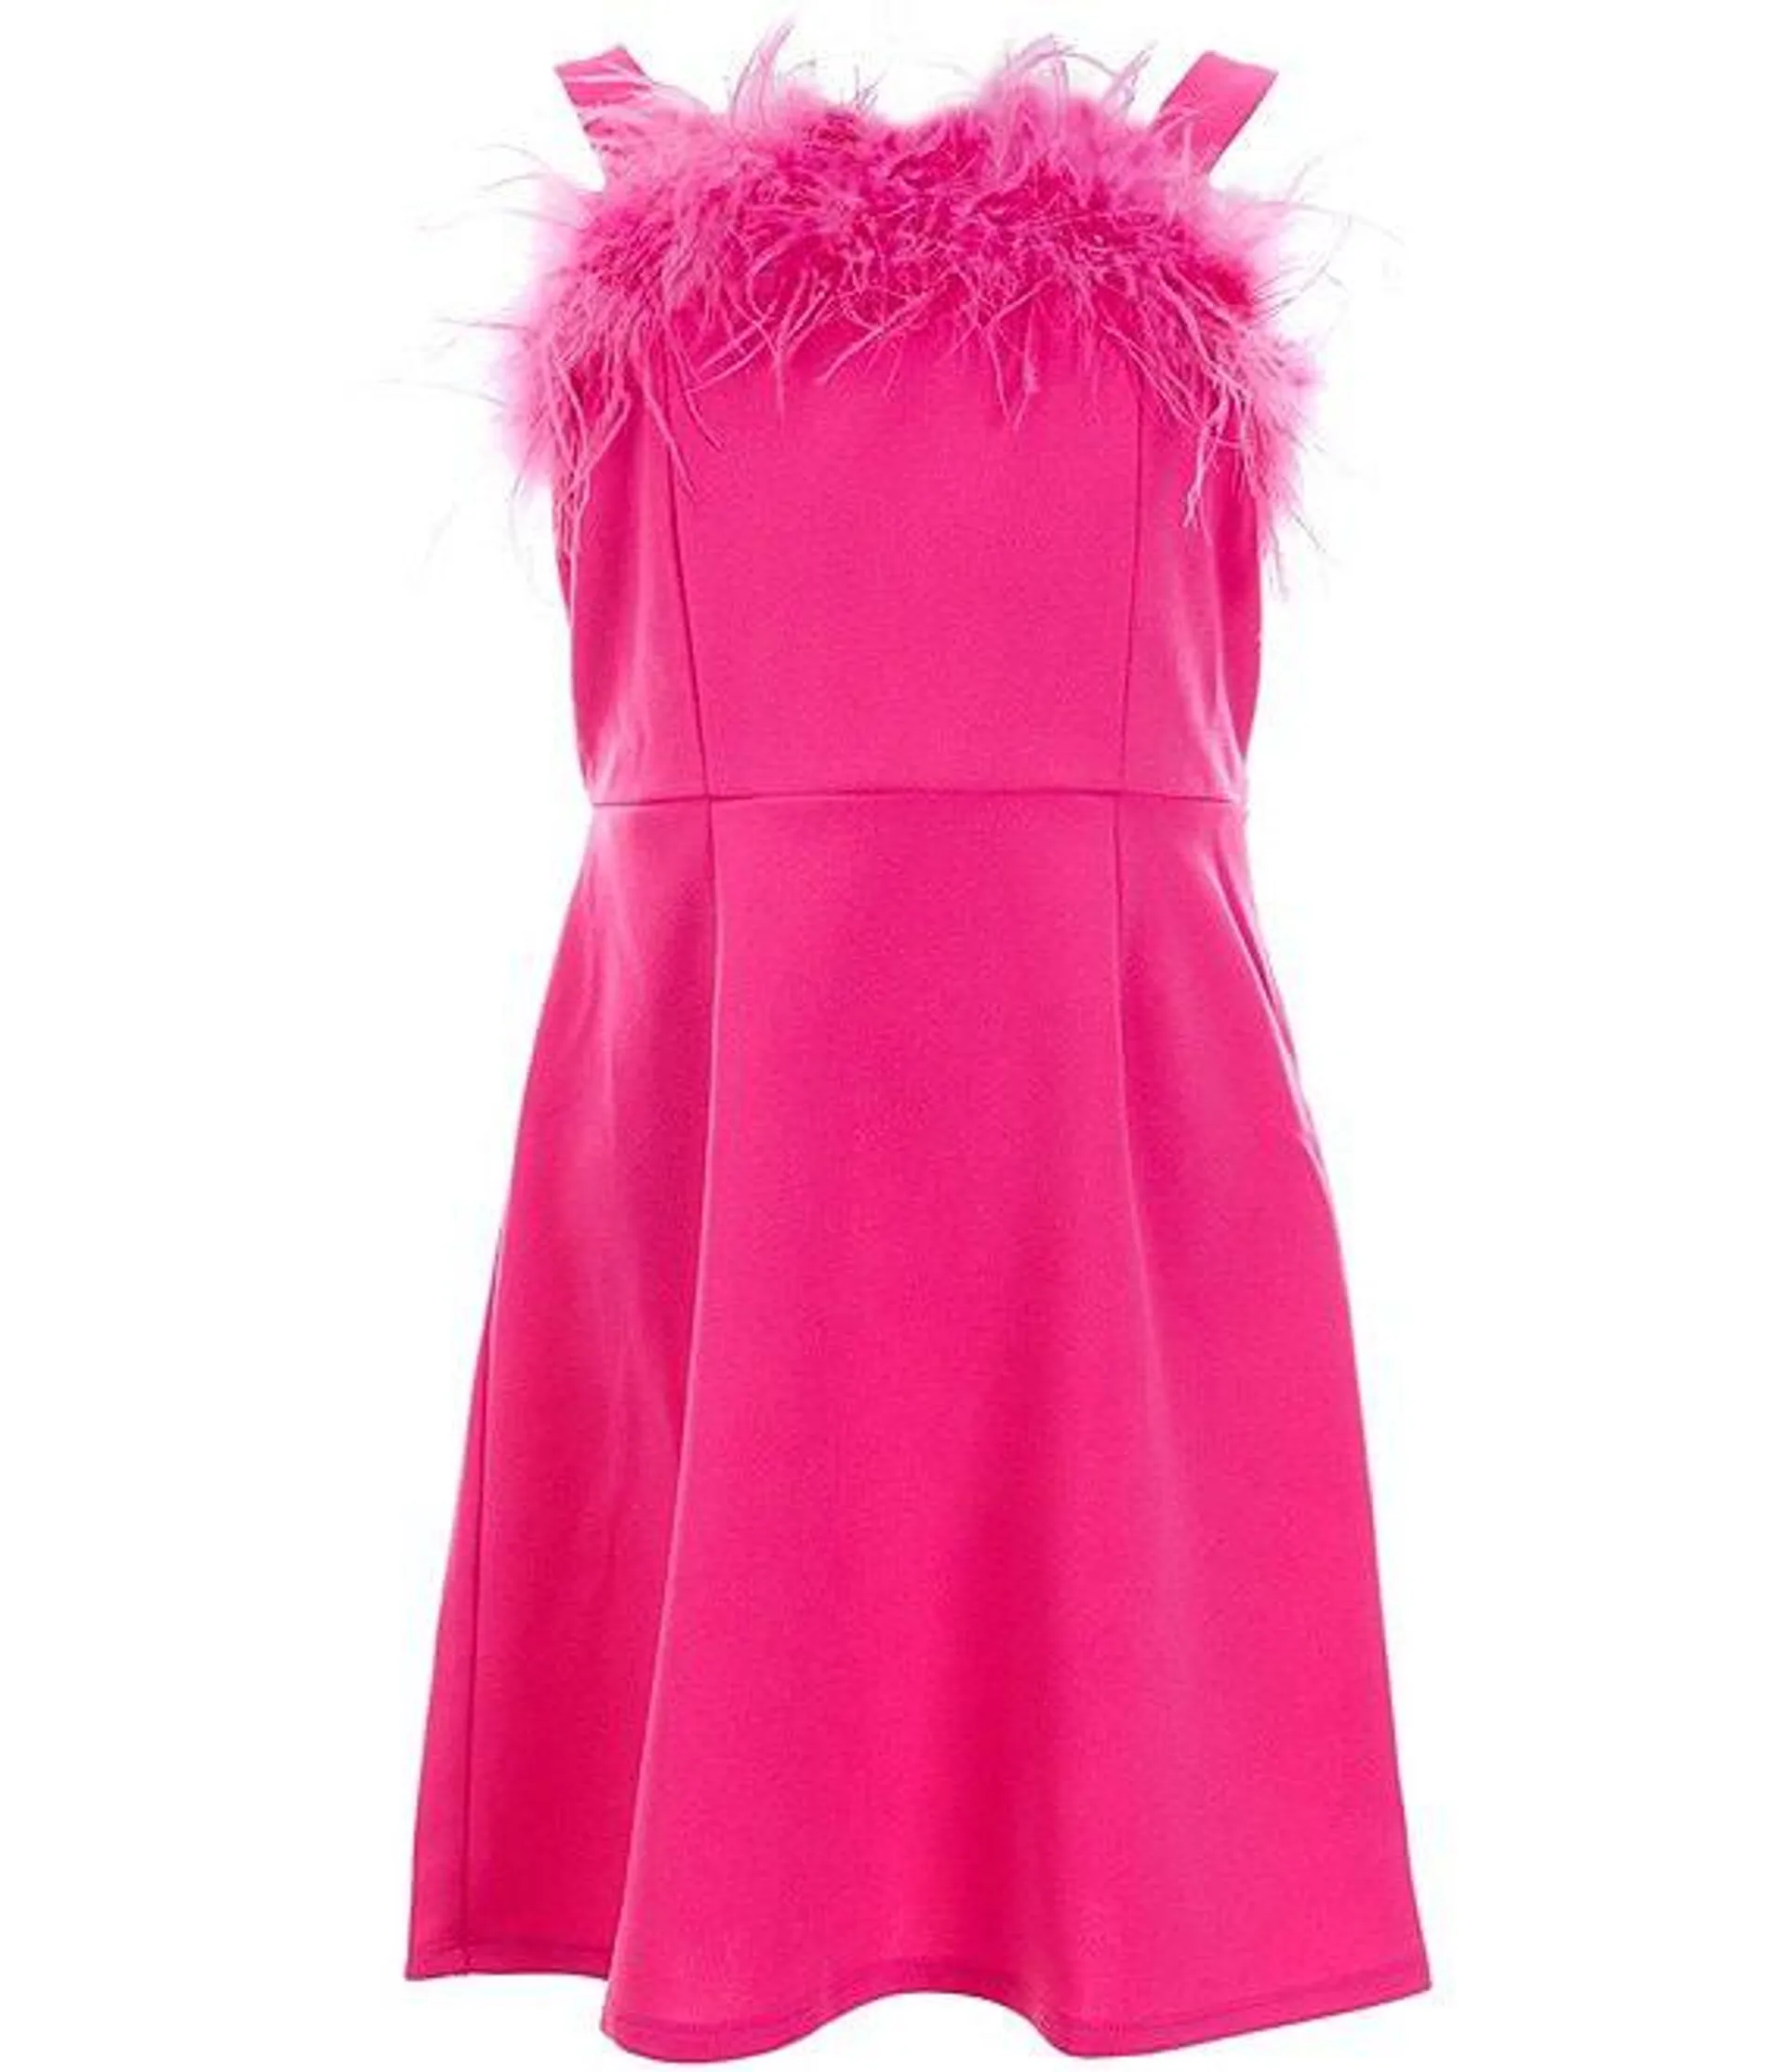 Big Girls 7-16 Sleeveless Faux-Feather-Accented Shift Dress